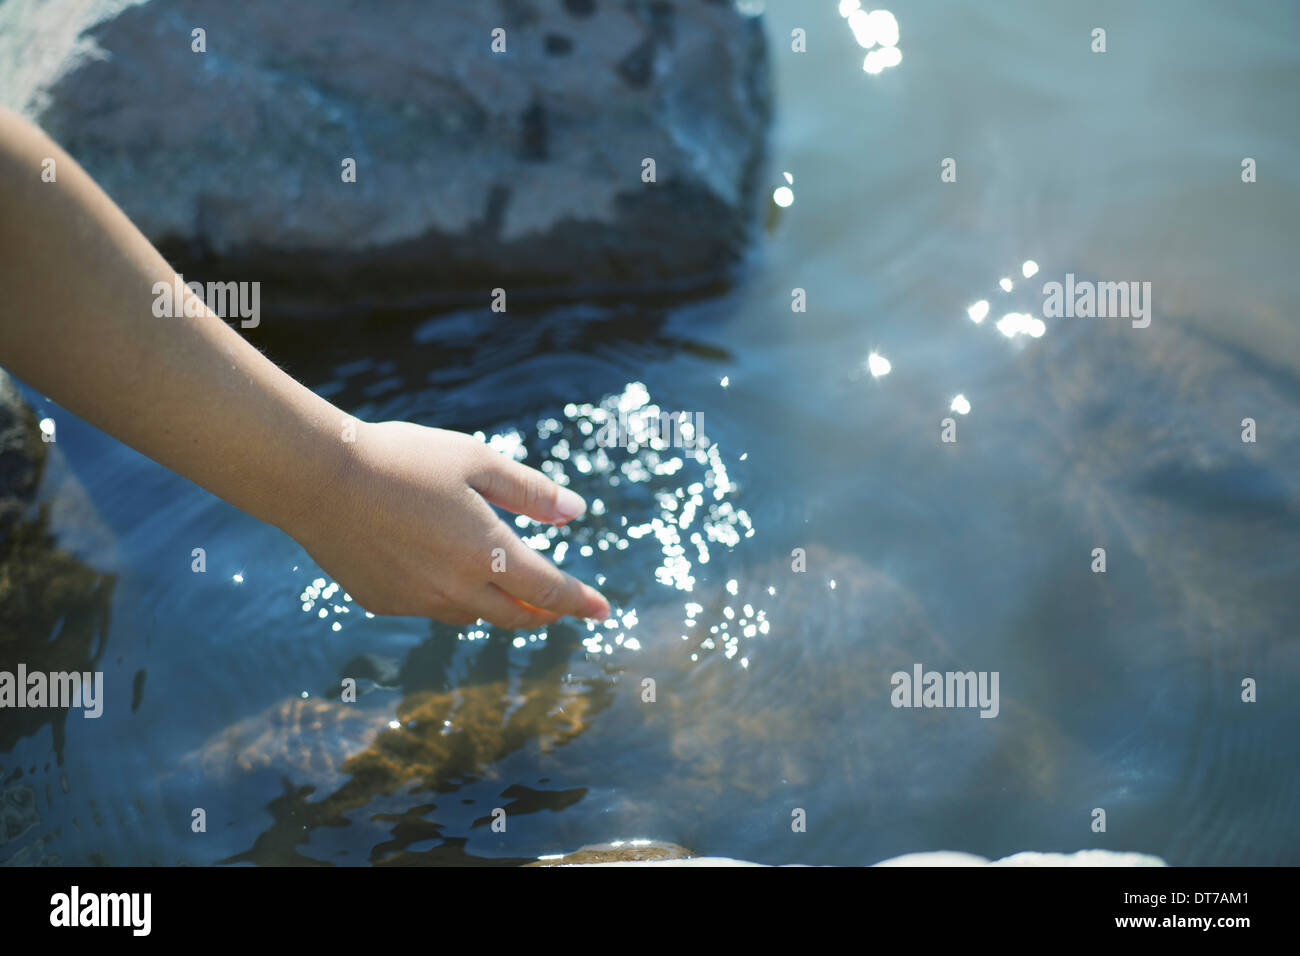 A young girl leaning forward to put her hand into clear shallow lake water Ashokan New York USA U S Stock Photo